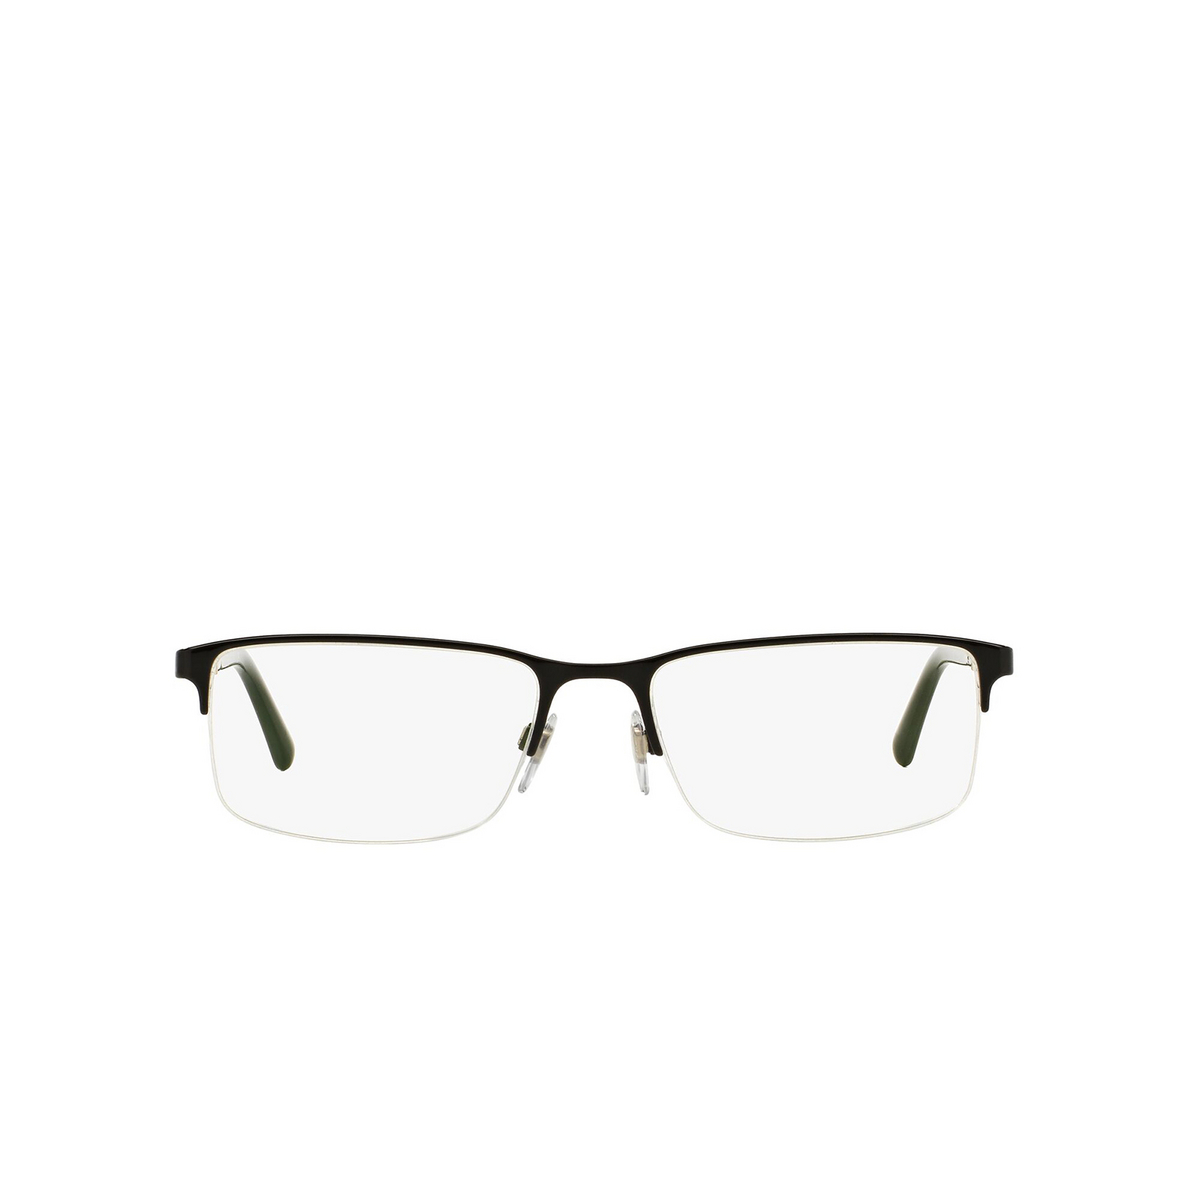 Burberry® Rectangle Eyeglasses: BE1282 color Black 1001 - front view.